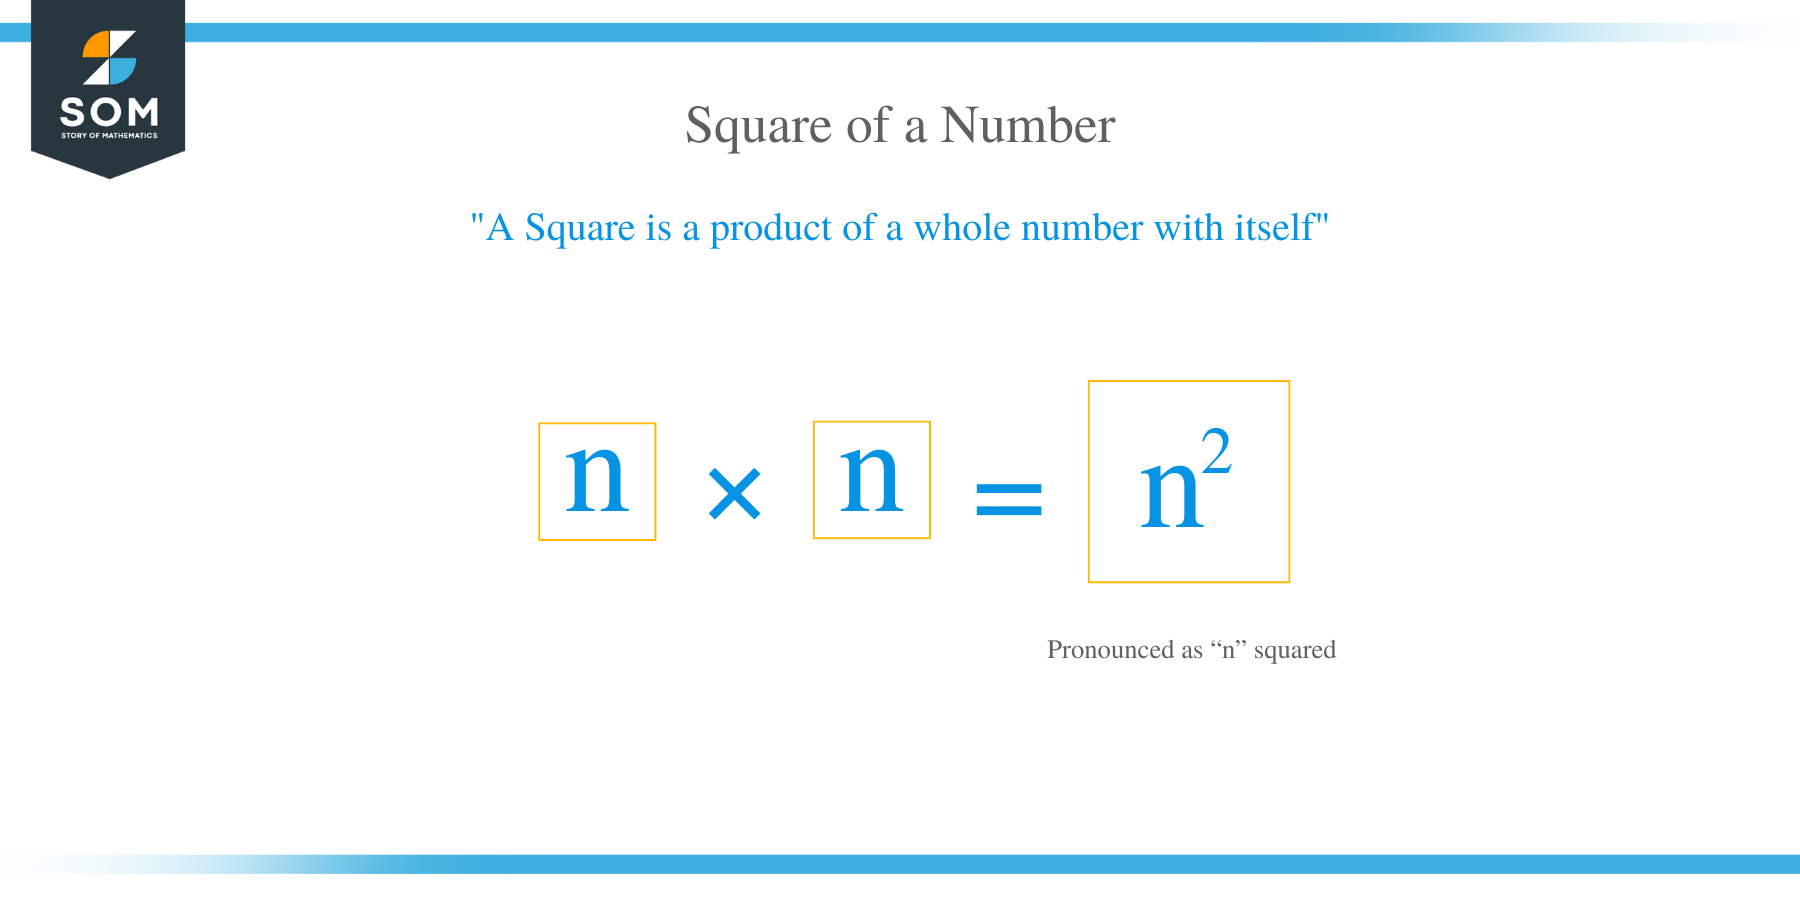 Square of a number